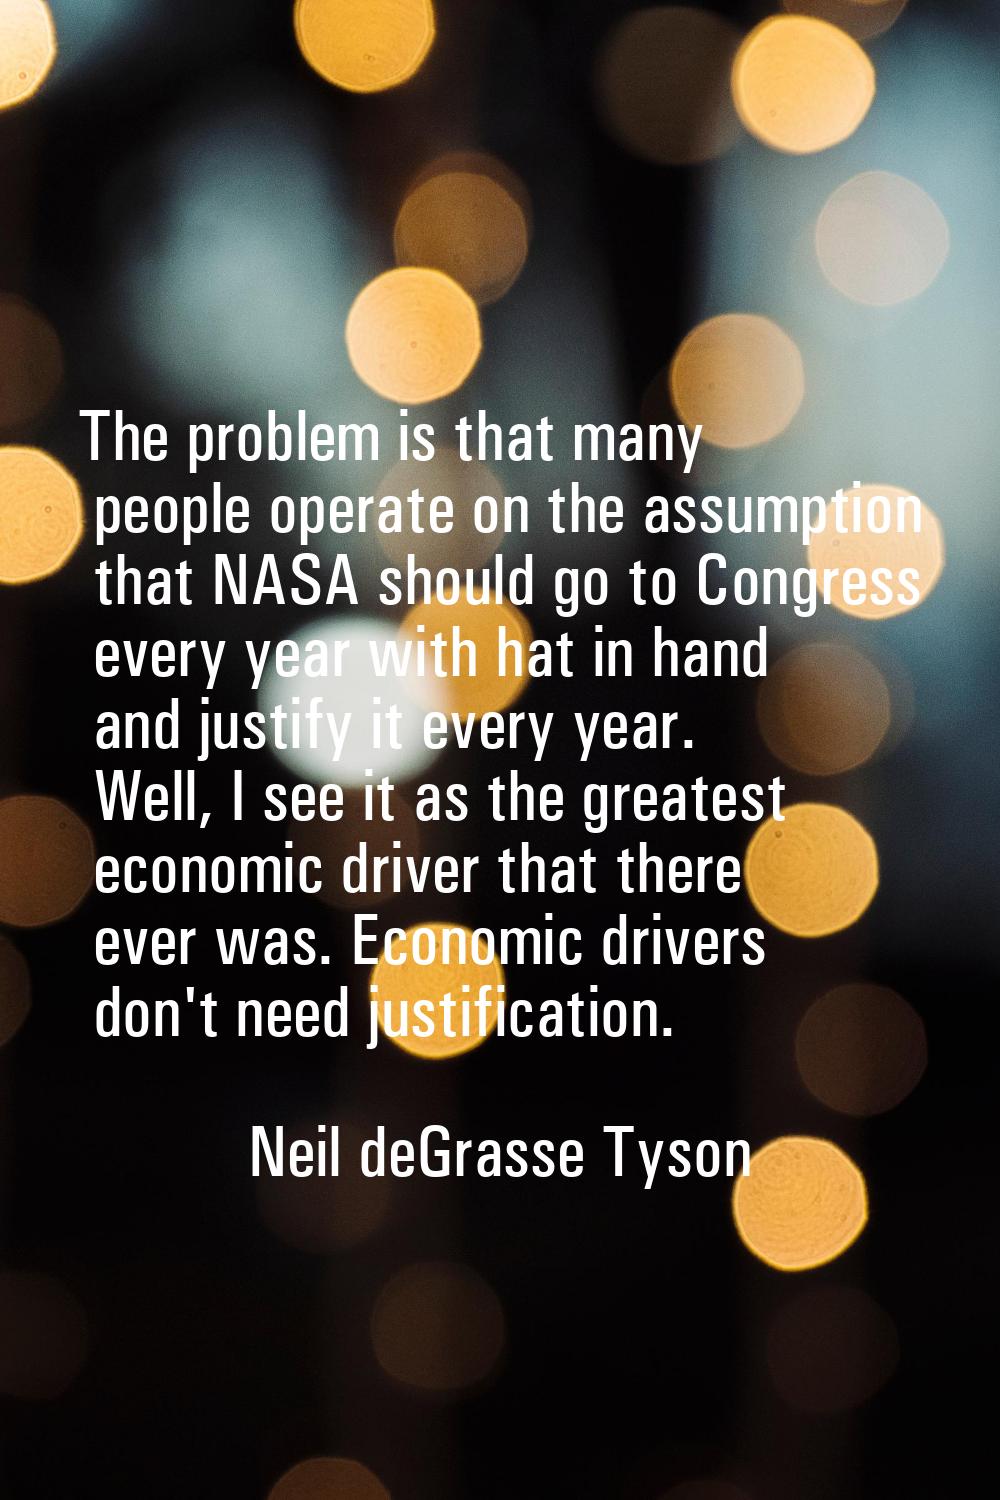 The problem is that many people operate on the assumption that NASA should go to Congress every yea